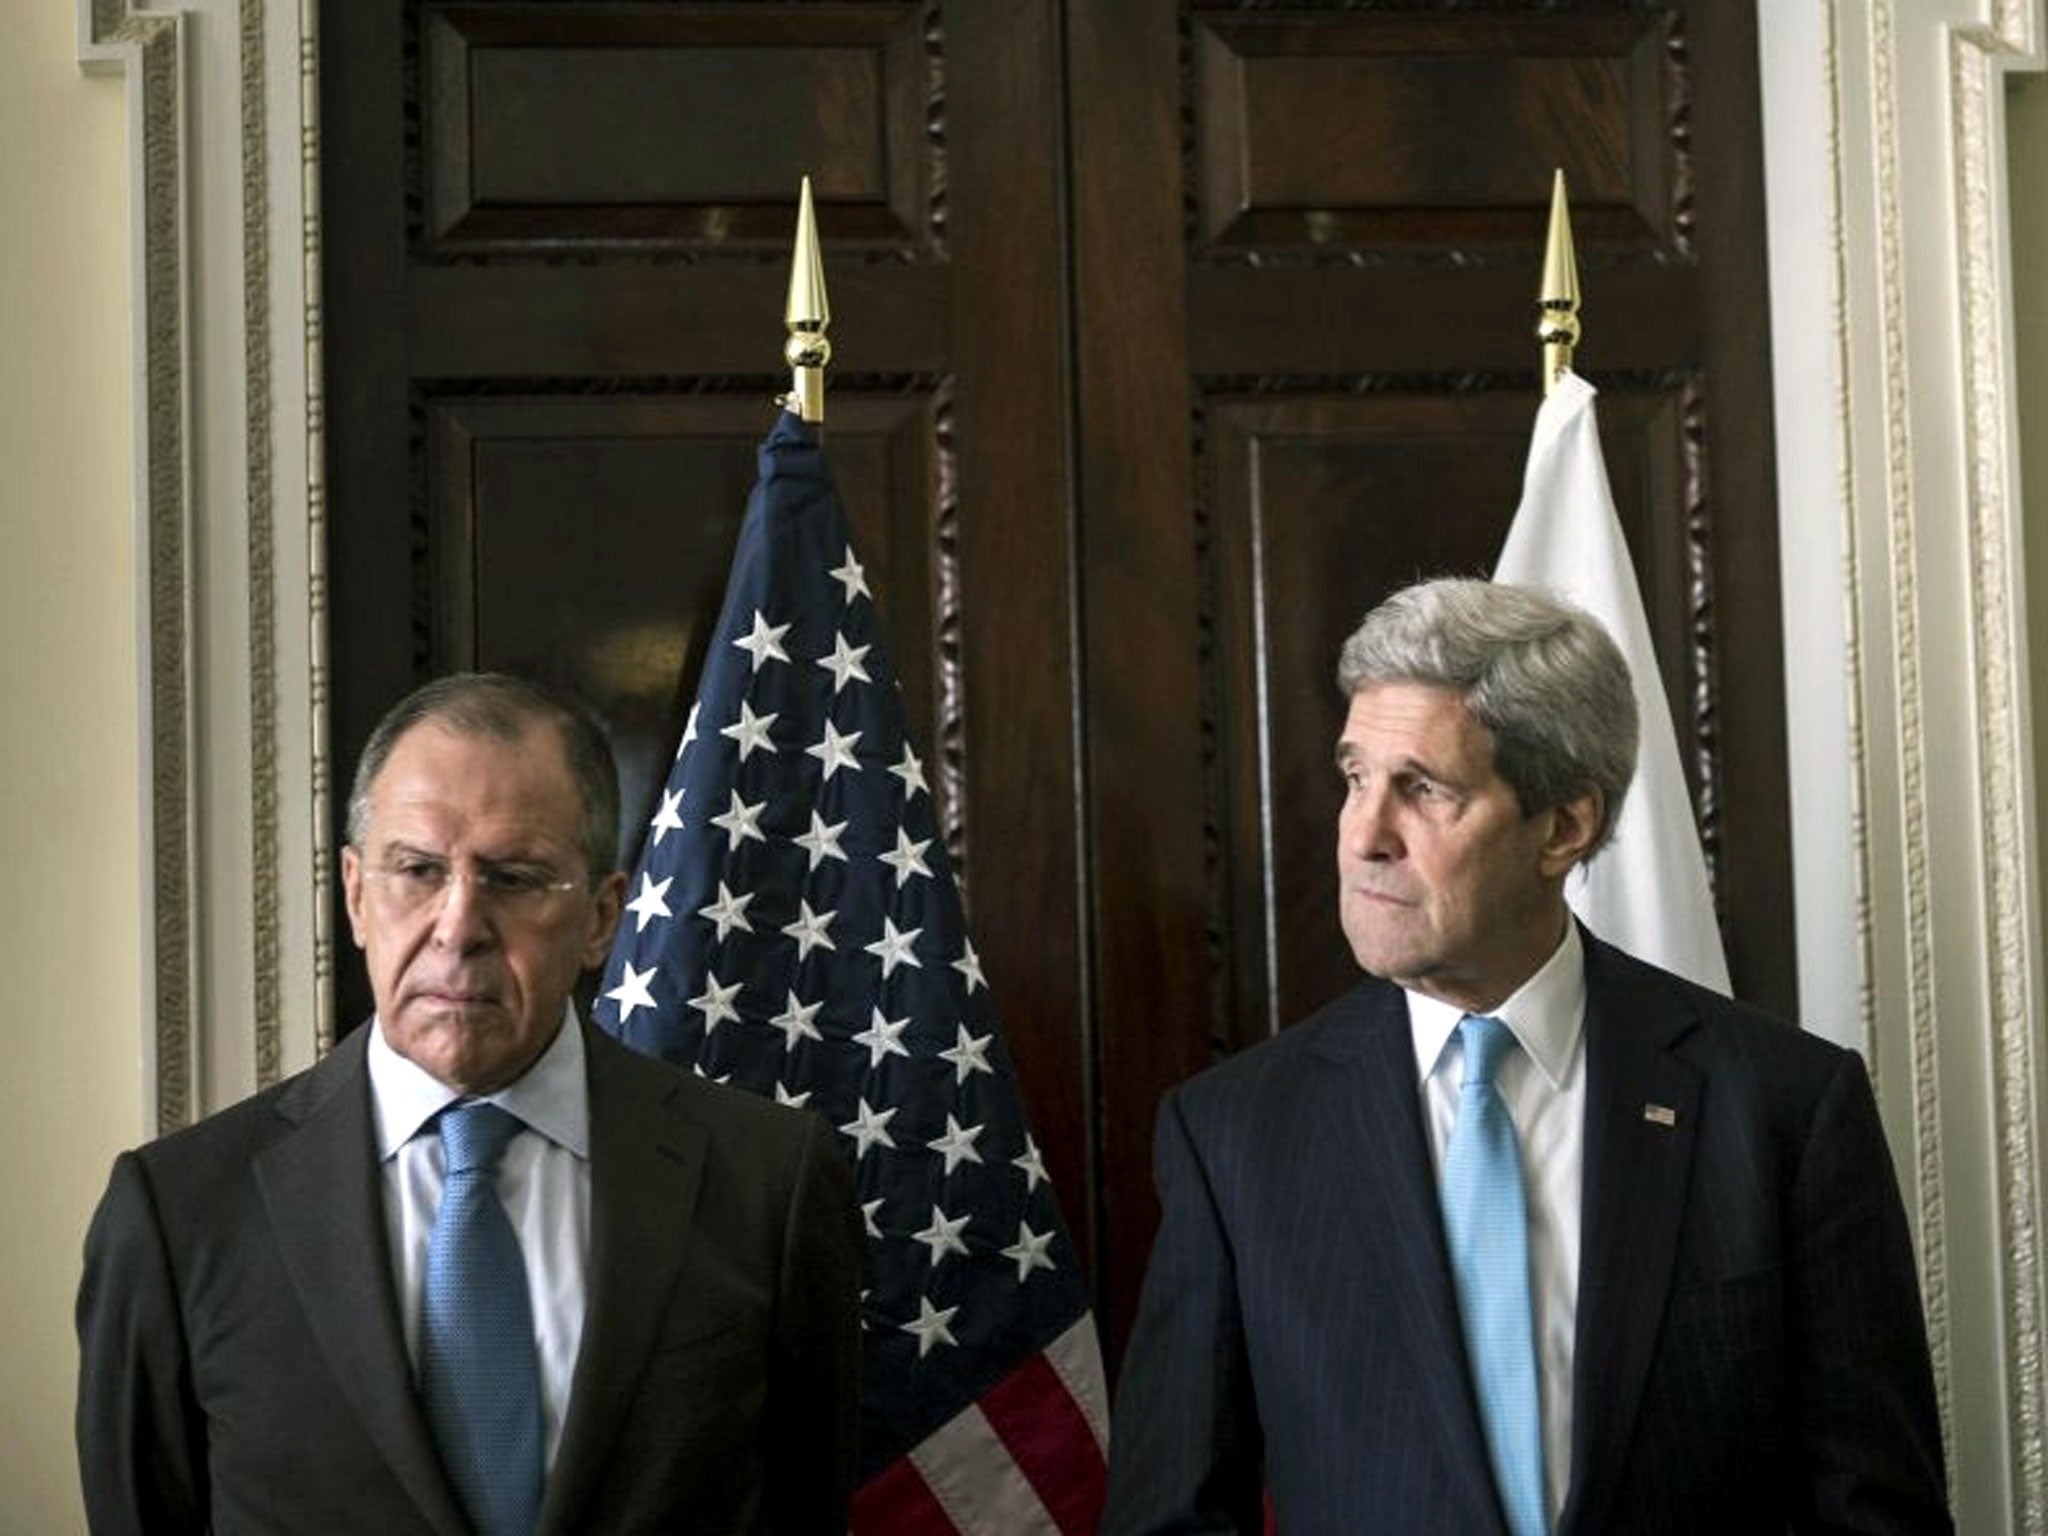 US Secretary of State John Kerry (R) and Russia's Foreign Minister Sergei Lavrov stand together before their meeting at Winfield House, the home of the US ambassador in London.